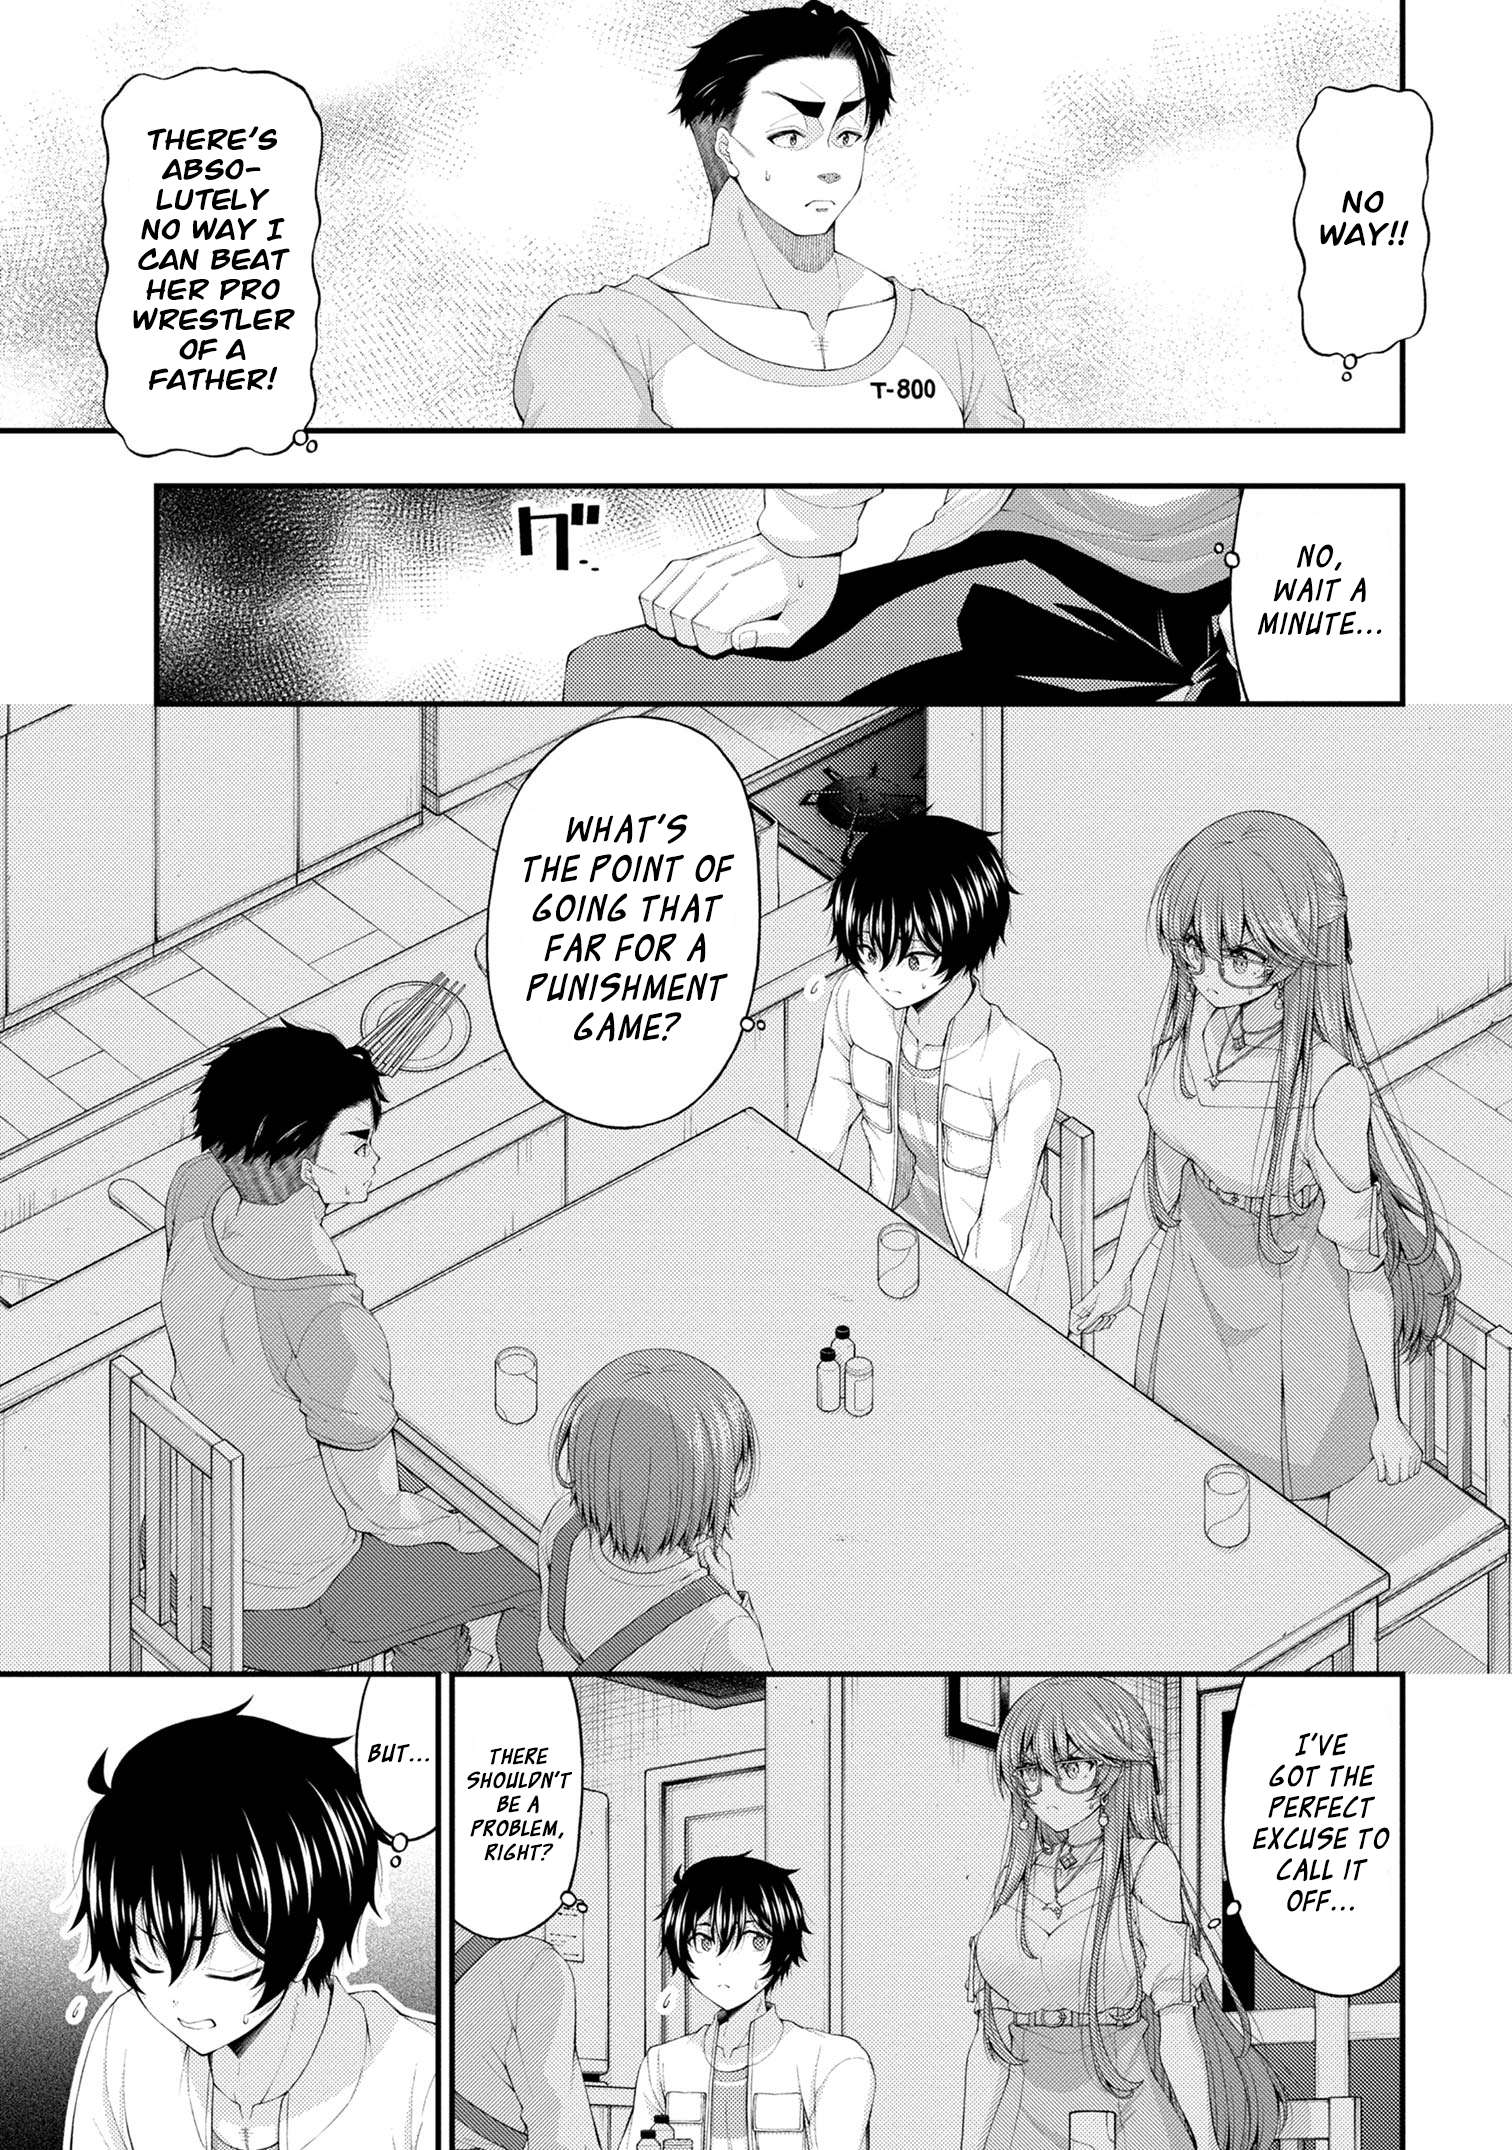 The Gal Who Was Meant to Confess to Me as a Game Punishment - chapter 12 - #3